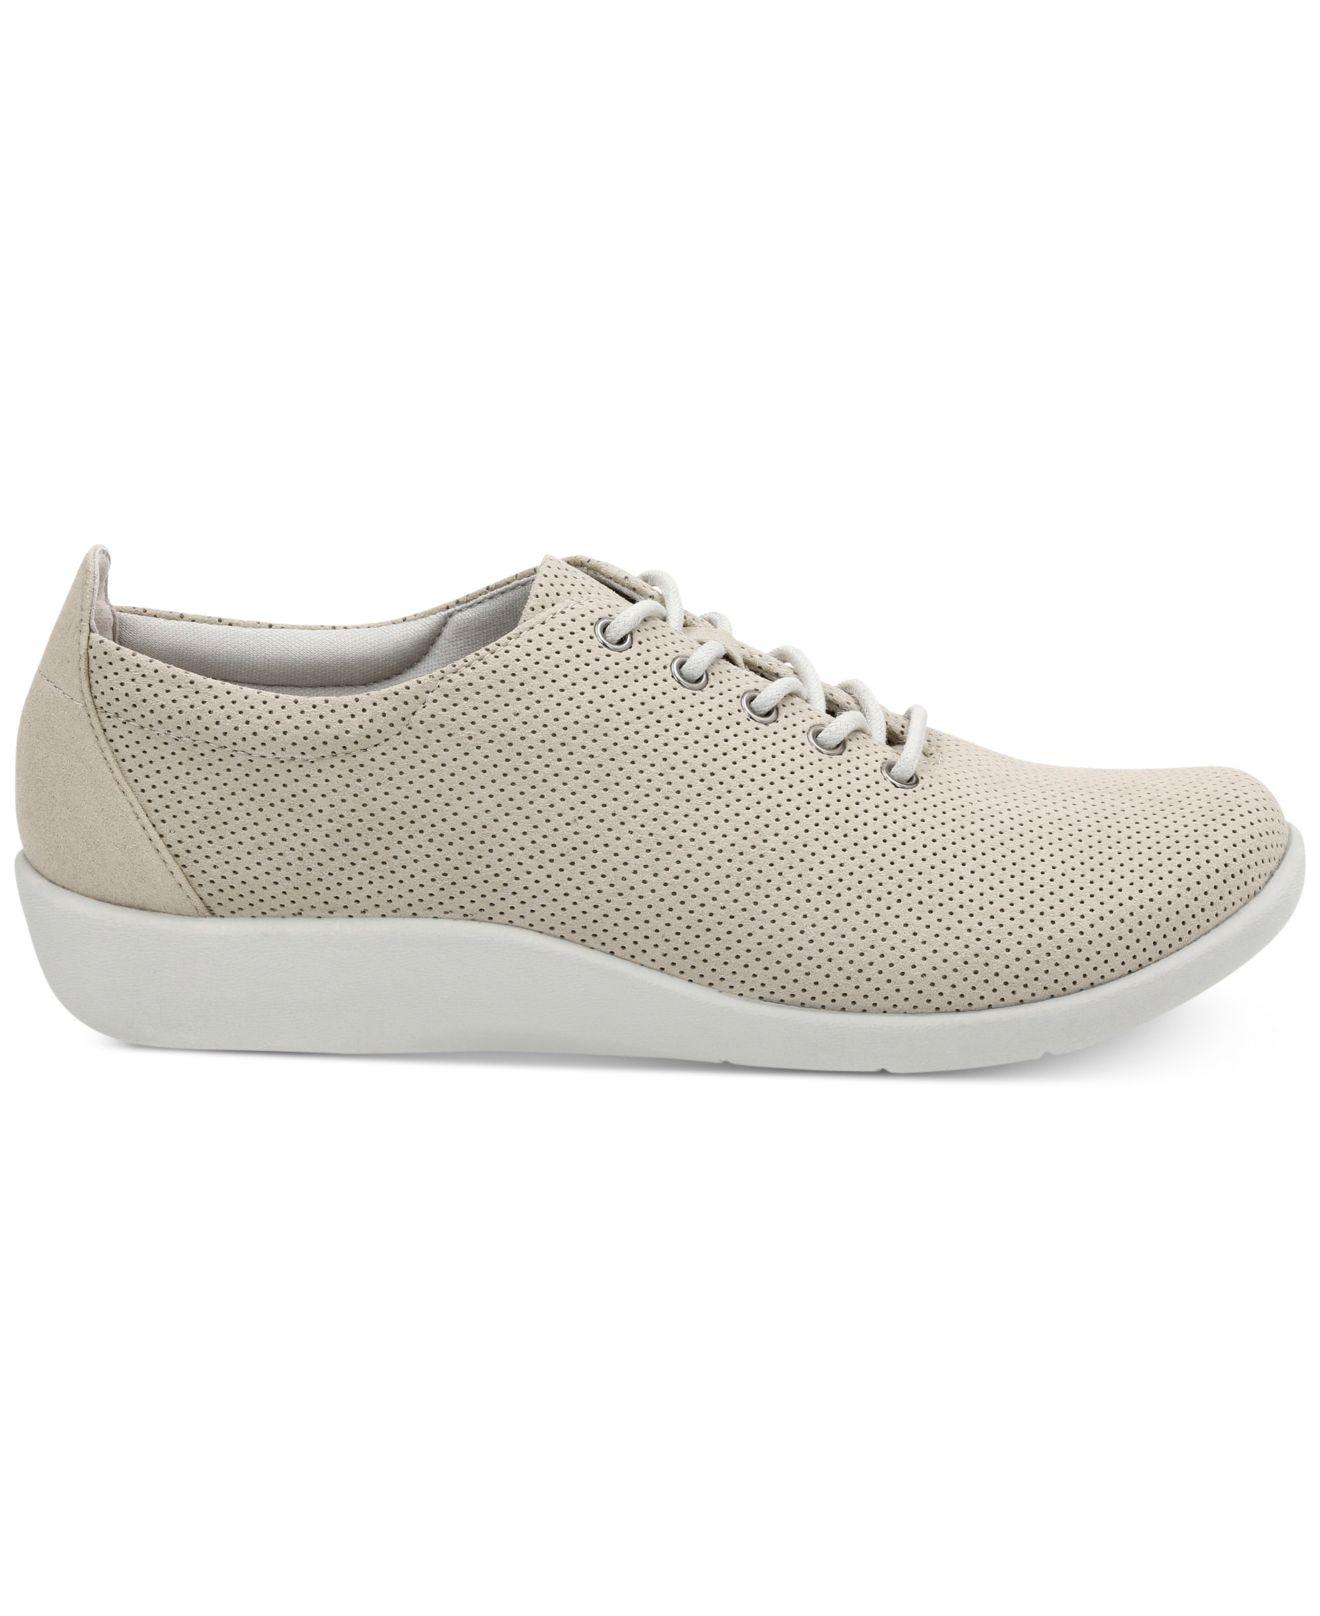 Clarks Cloud Steppers Sillian Tino Sneakers for Men - Lyst